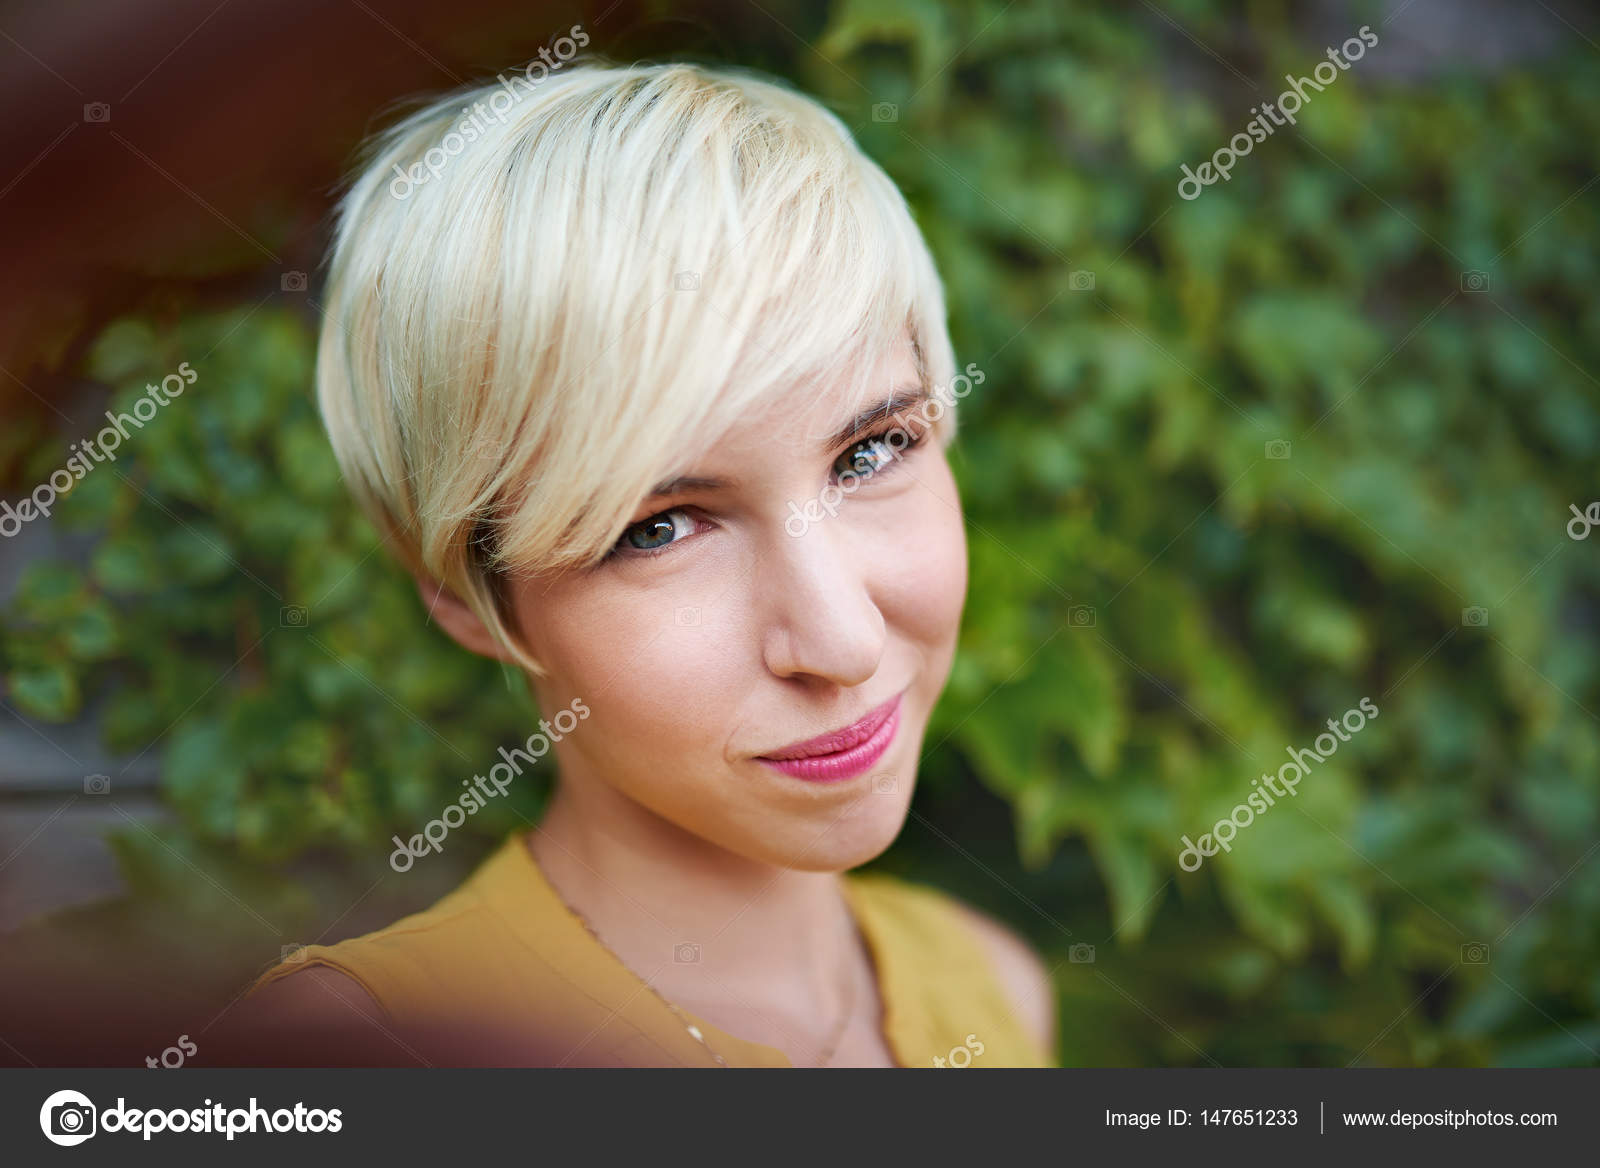 Attractive White Woman Taking A Selfie Against An Ivy Fence